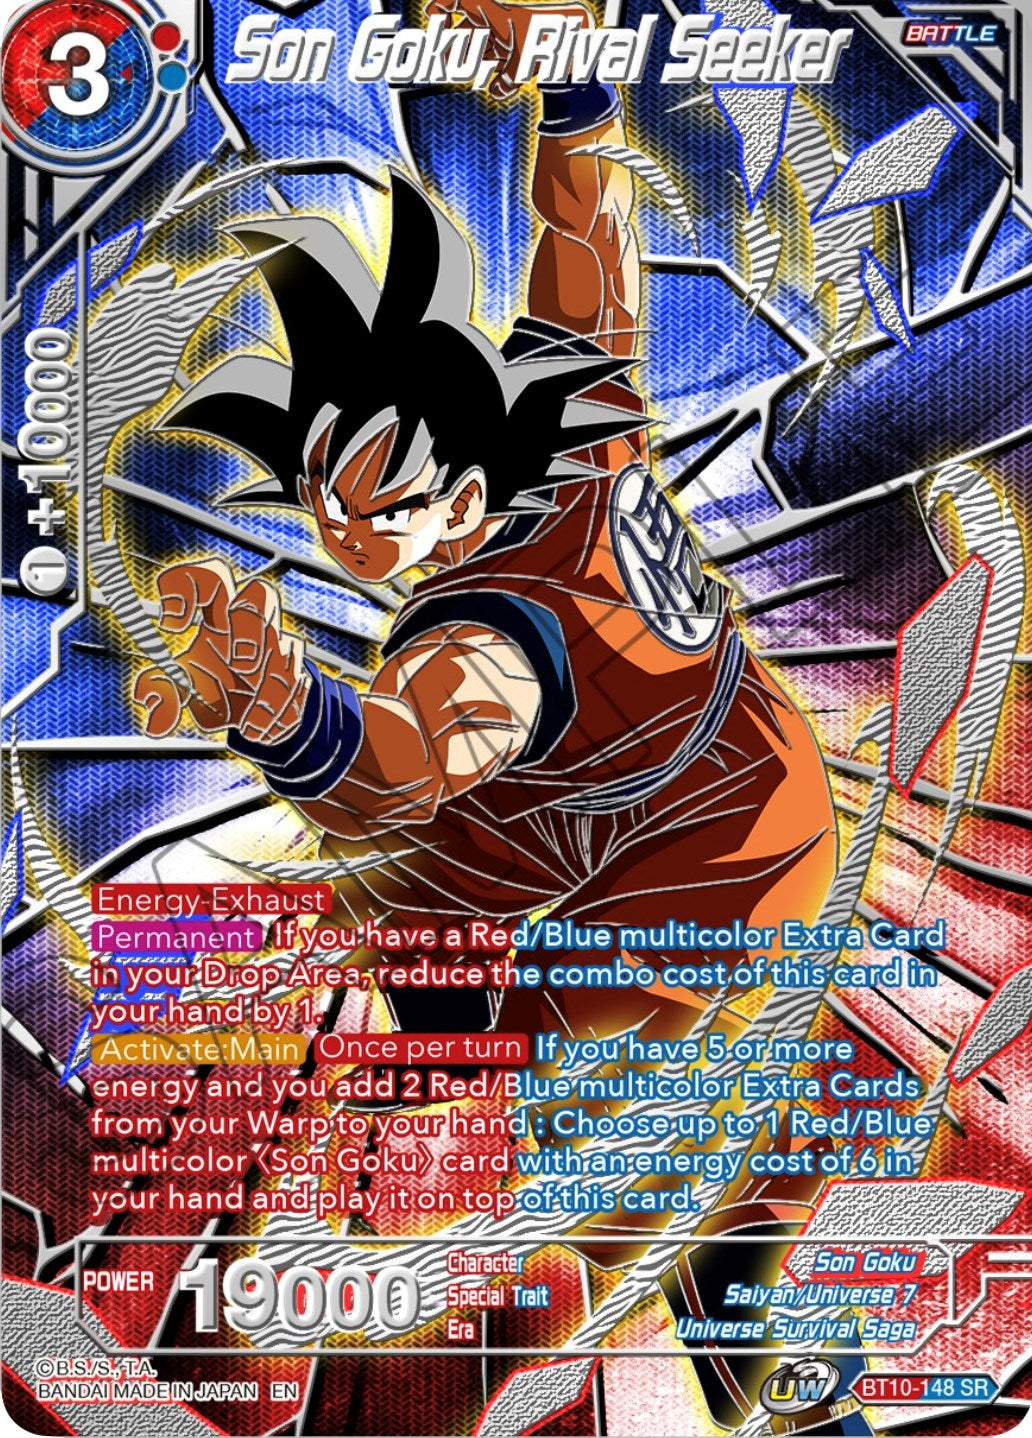 Son Goku, Rival Seeker (BT10-148) [Collector's Selection Vol. 3] | North Valley Games